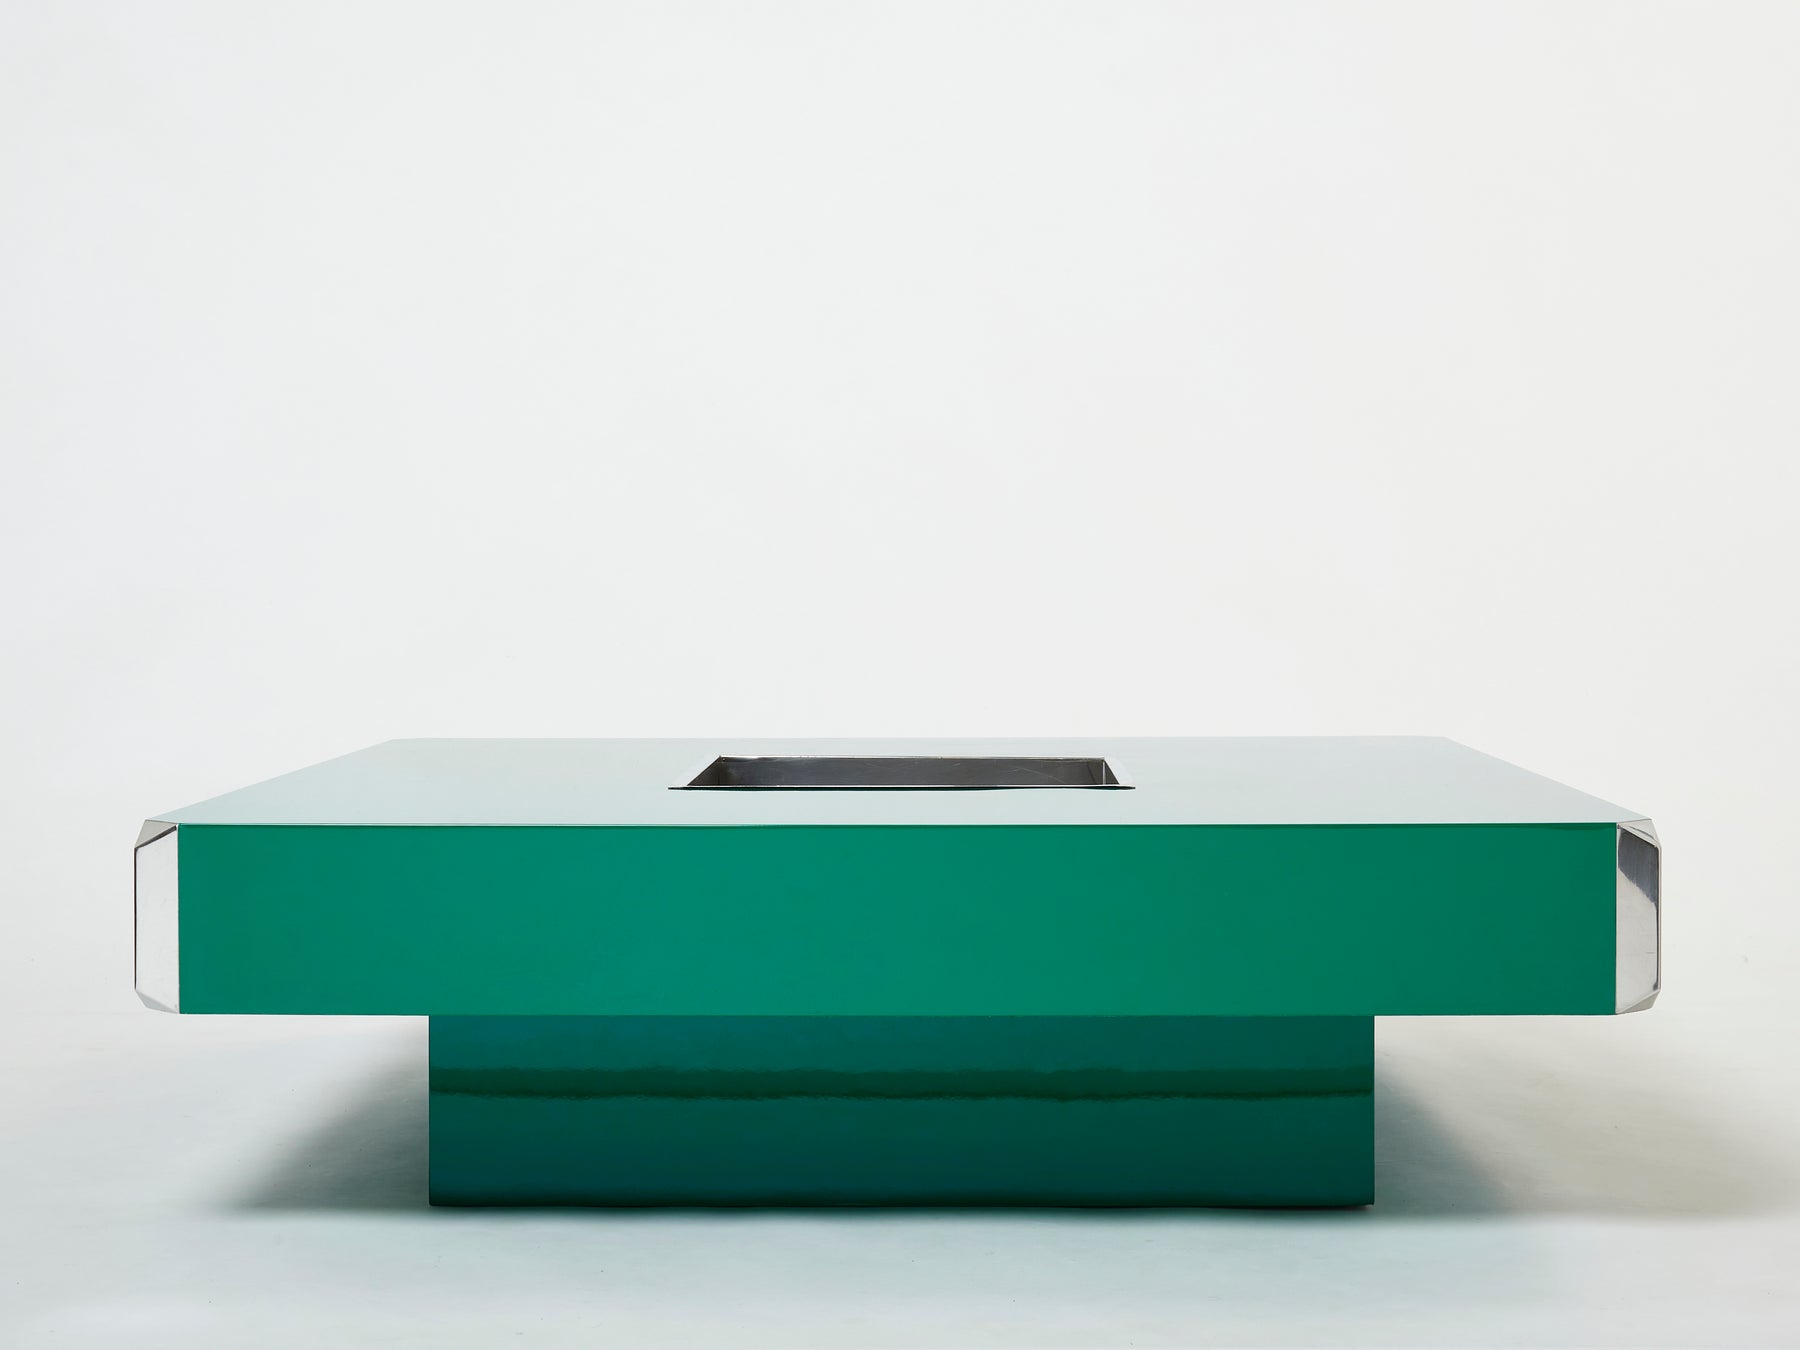 Willy Rizzo green lacquer and chrome square bar coffee table Alveo 1970s